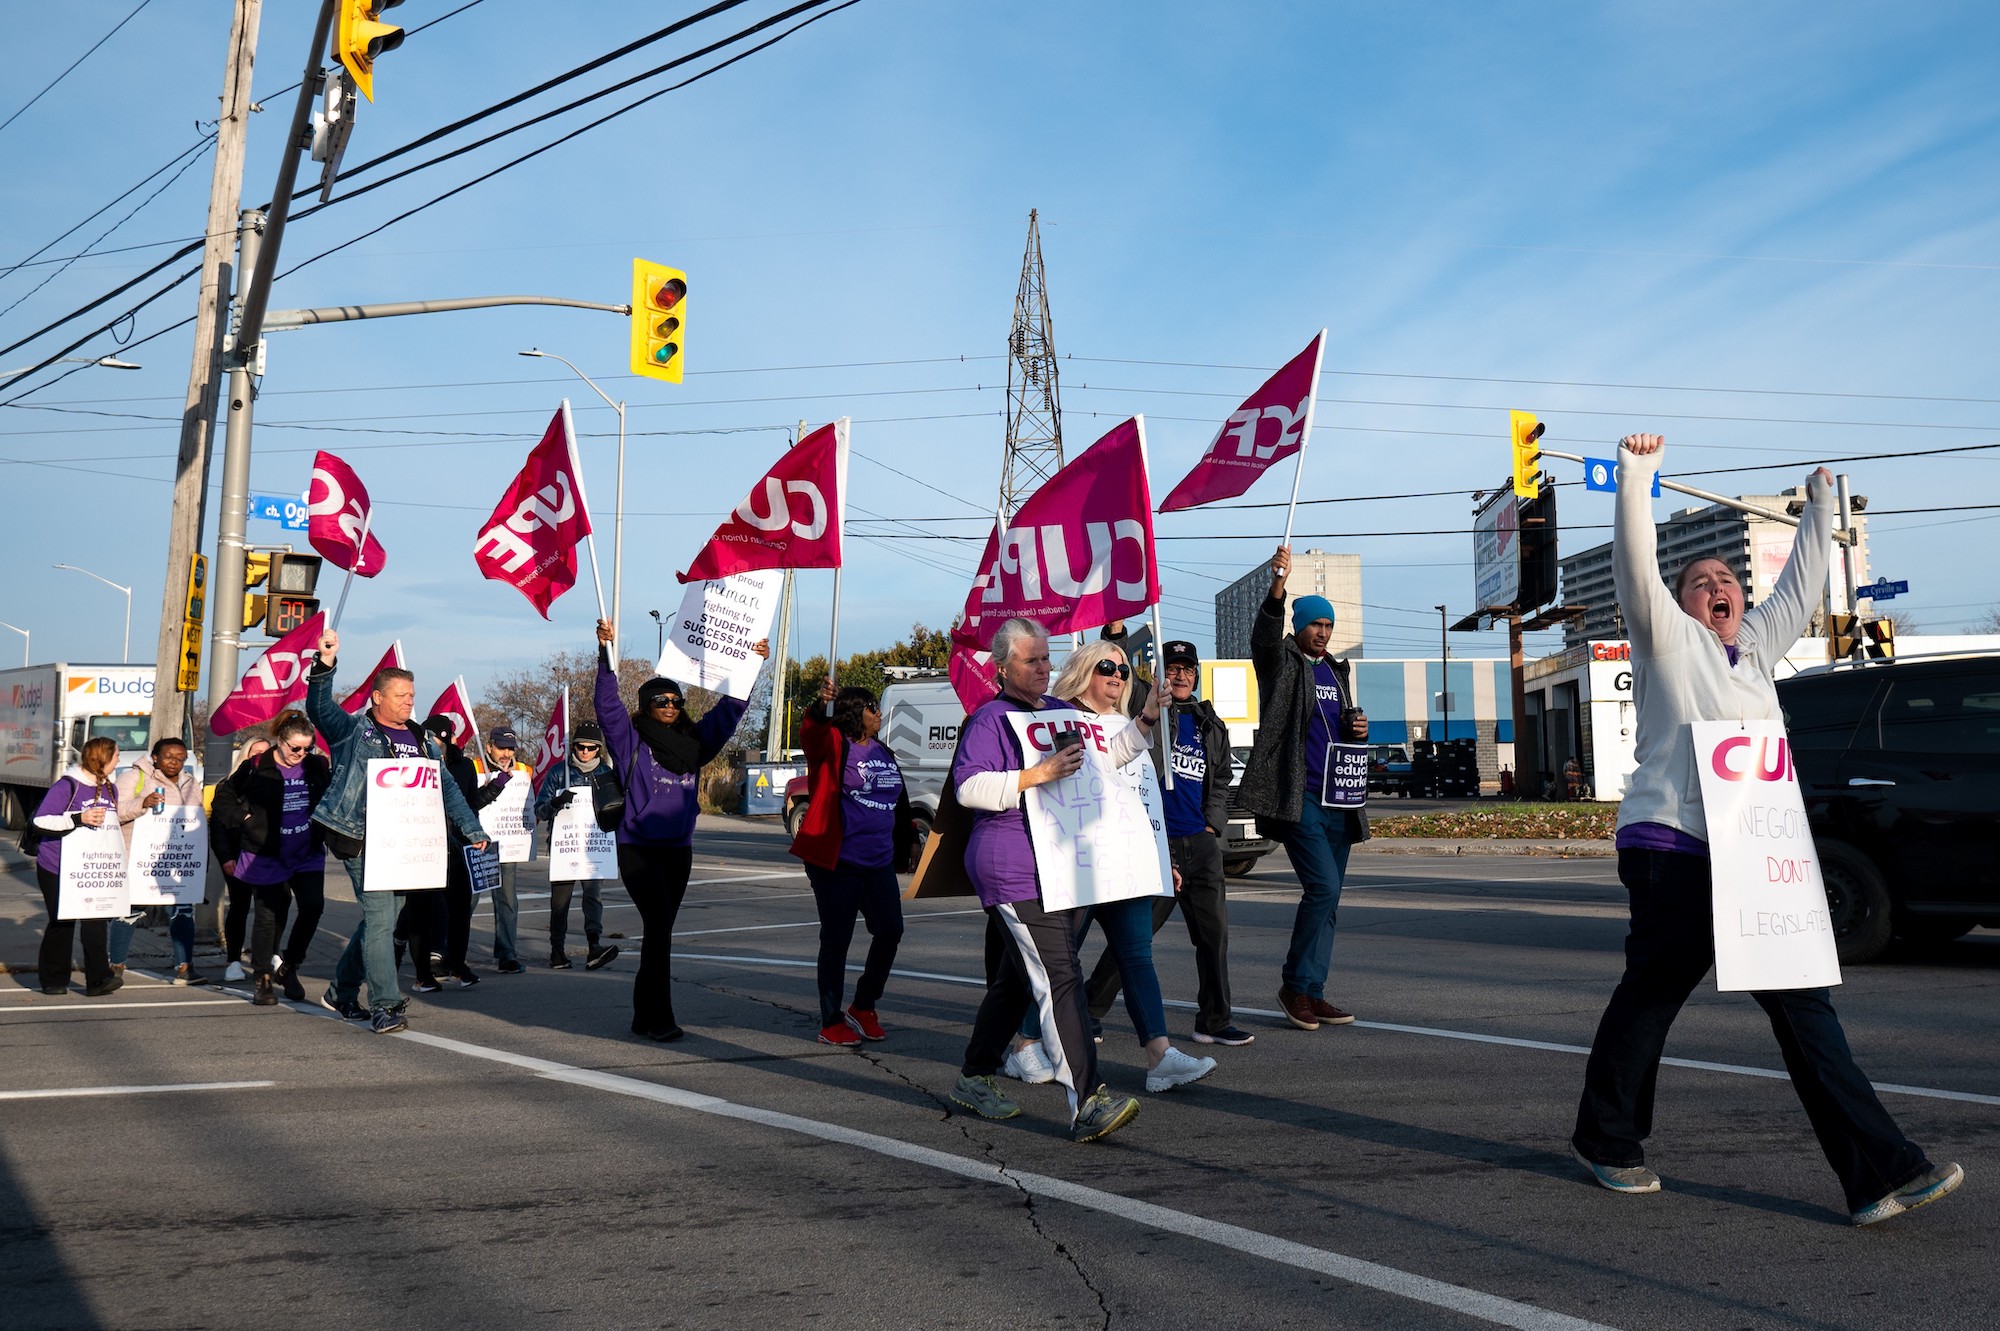 Ontario education workers to begin voting on deal Thursday through to Dec. 5